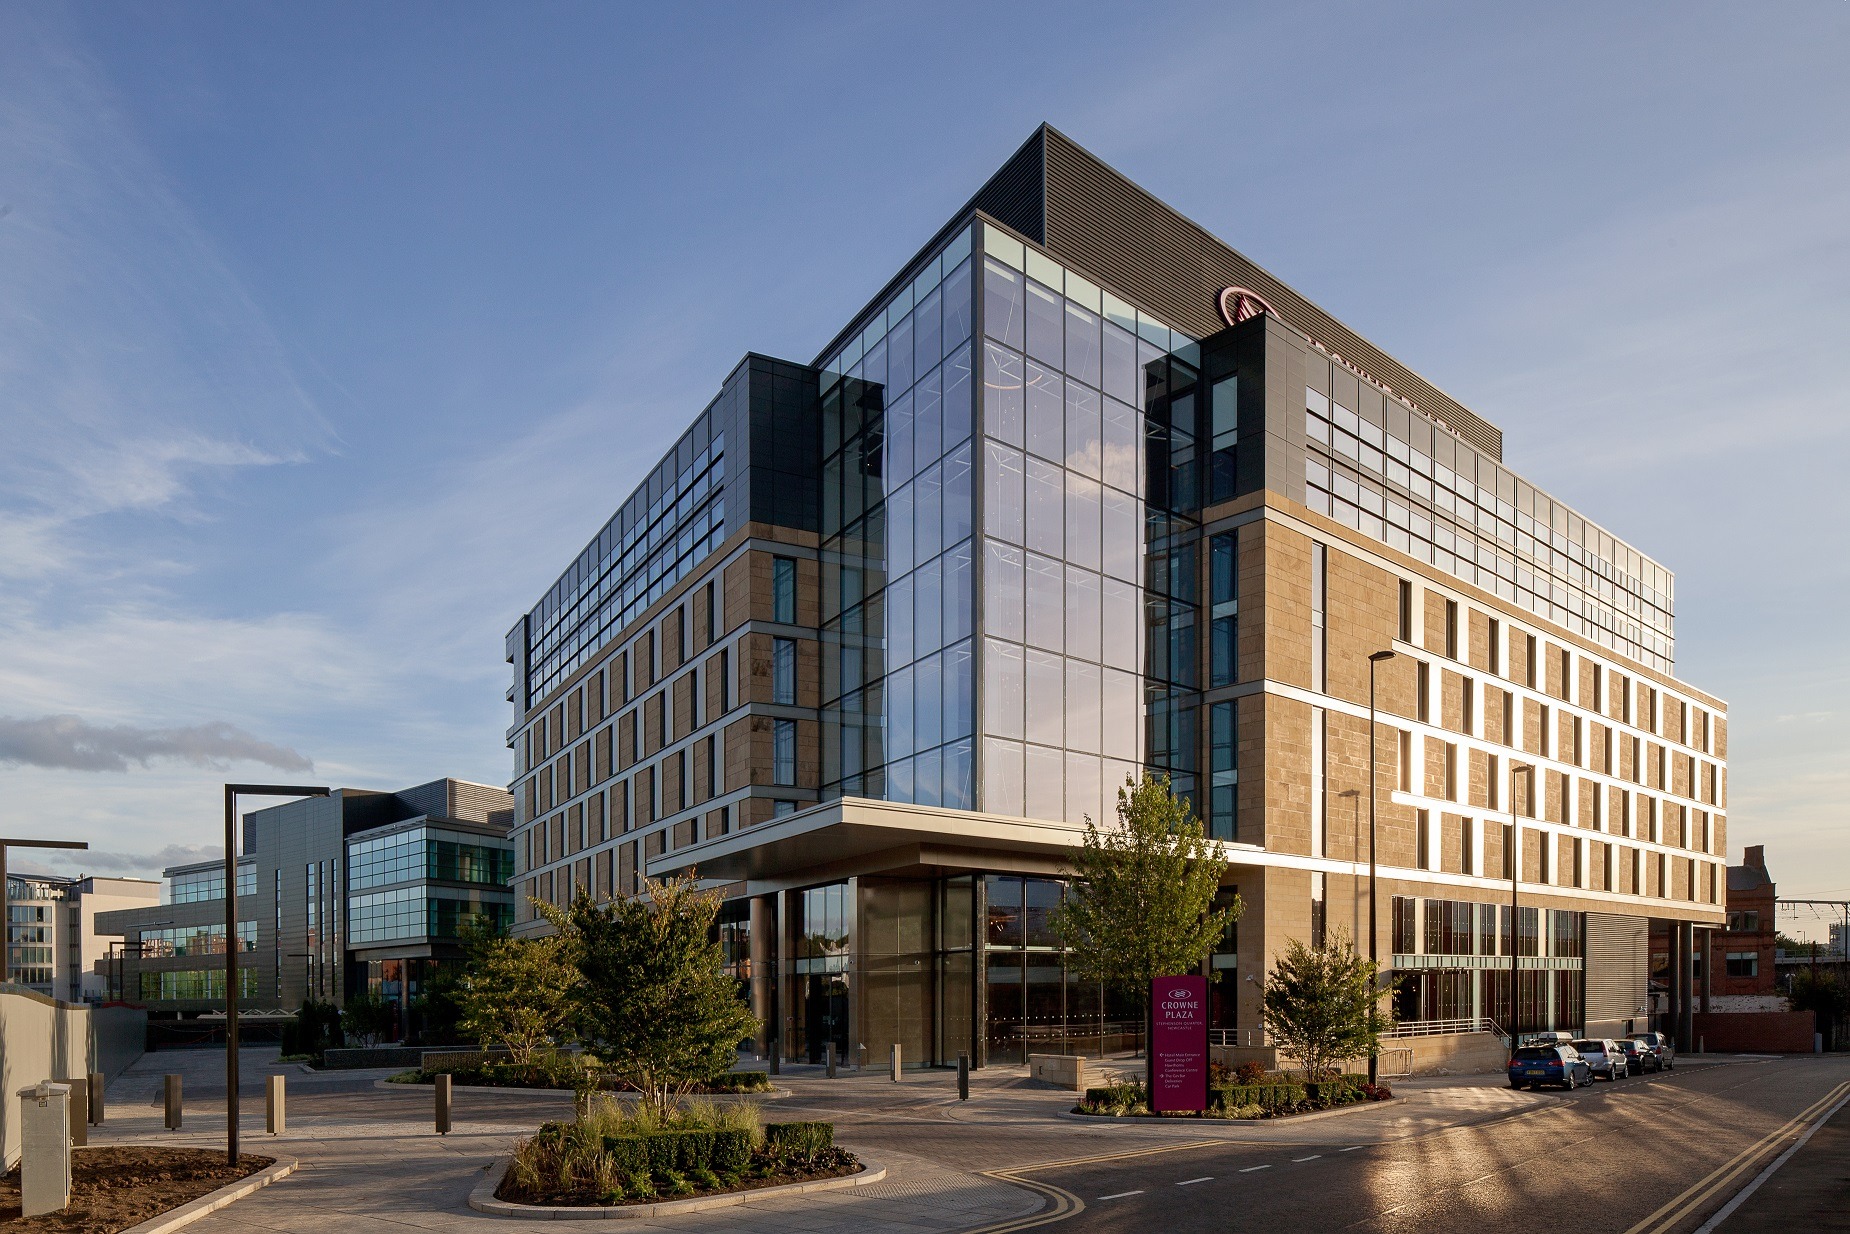 Crowne Plaza Newcastle signing cements strong first quarter for Interstate